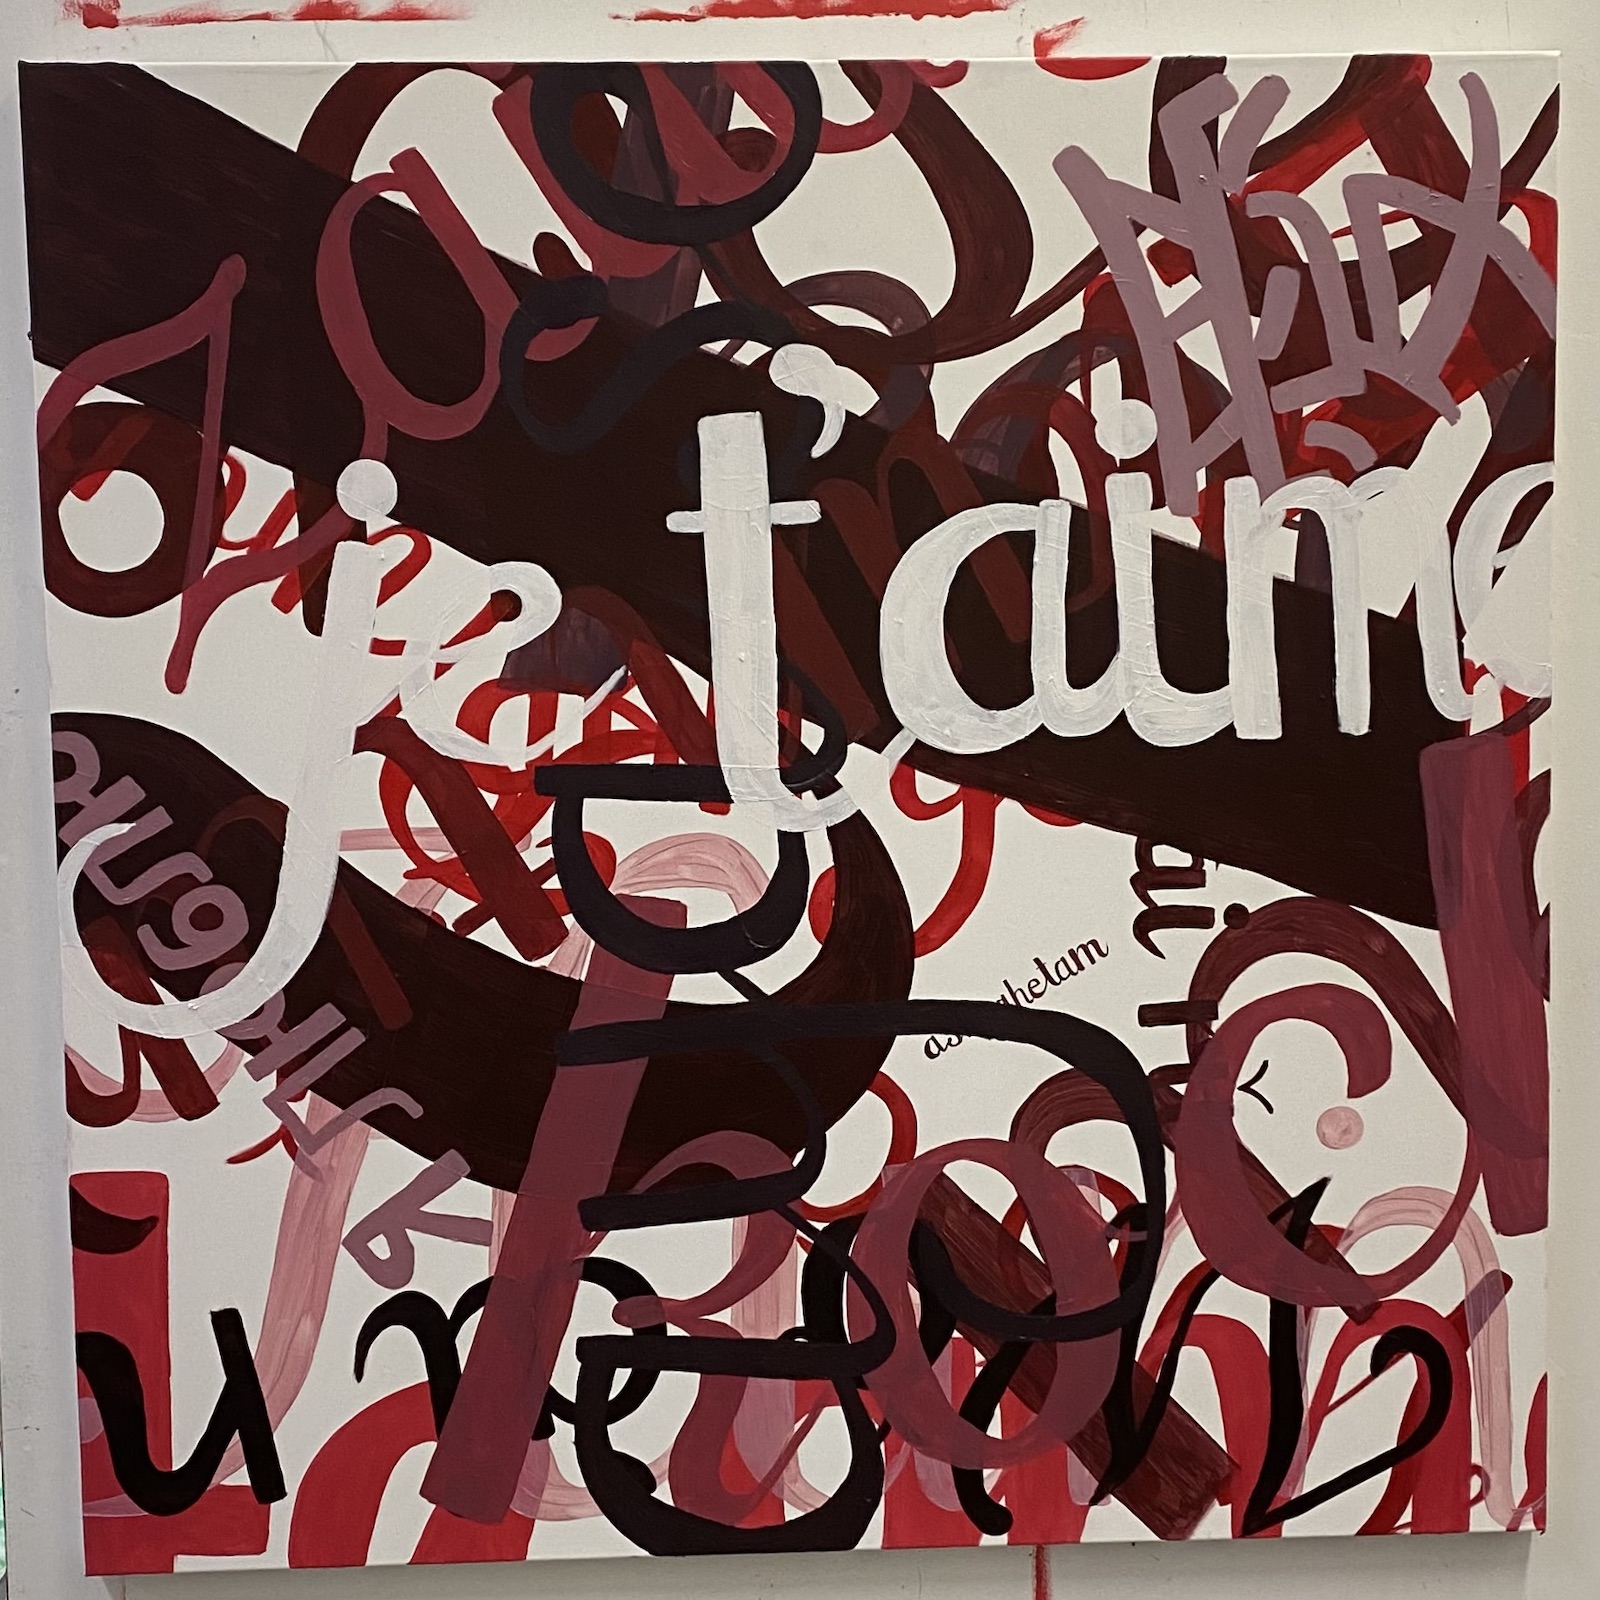 A painting with overlapping letters of white, brown, red, and pink